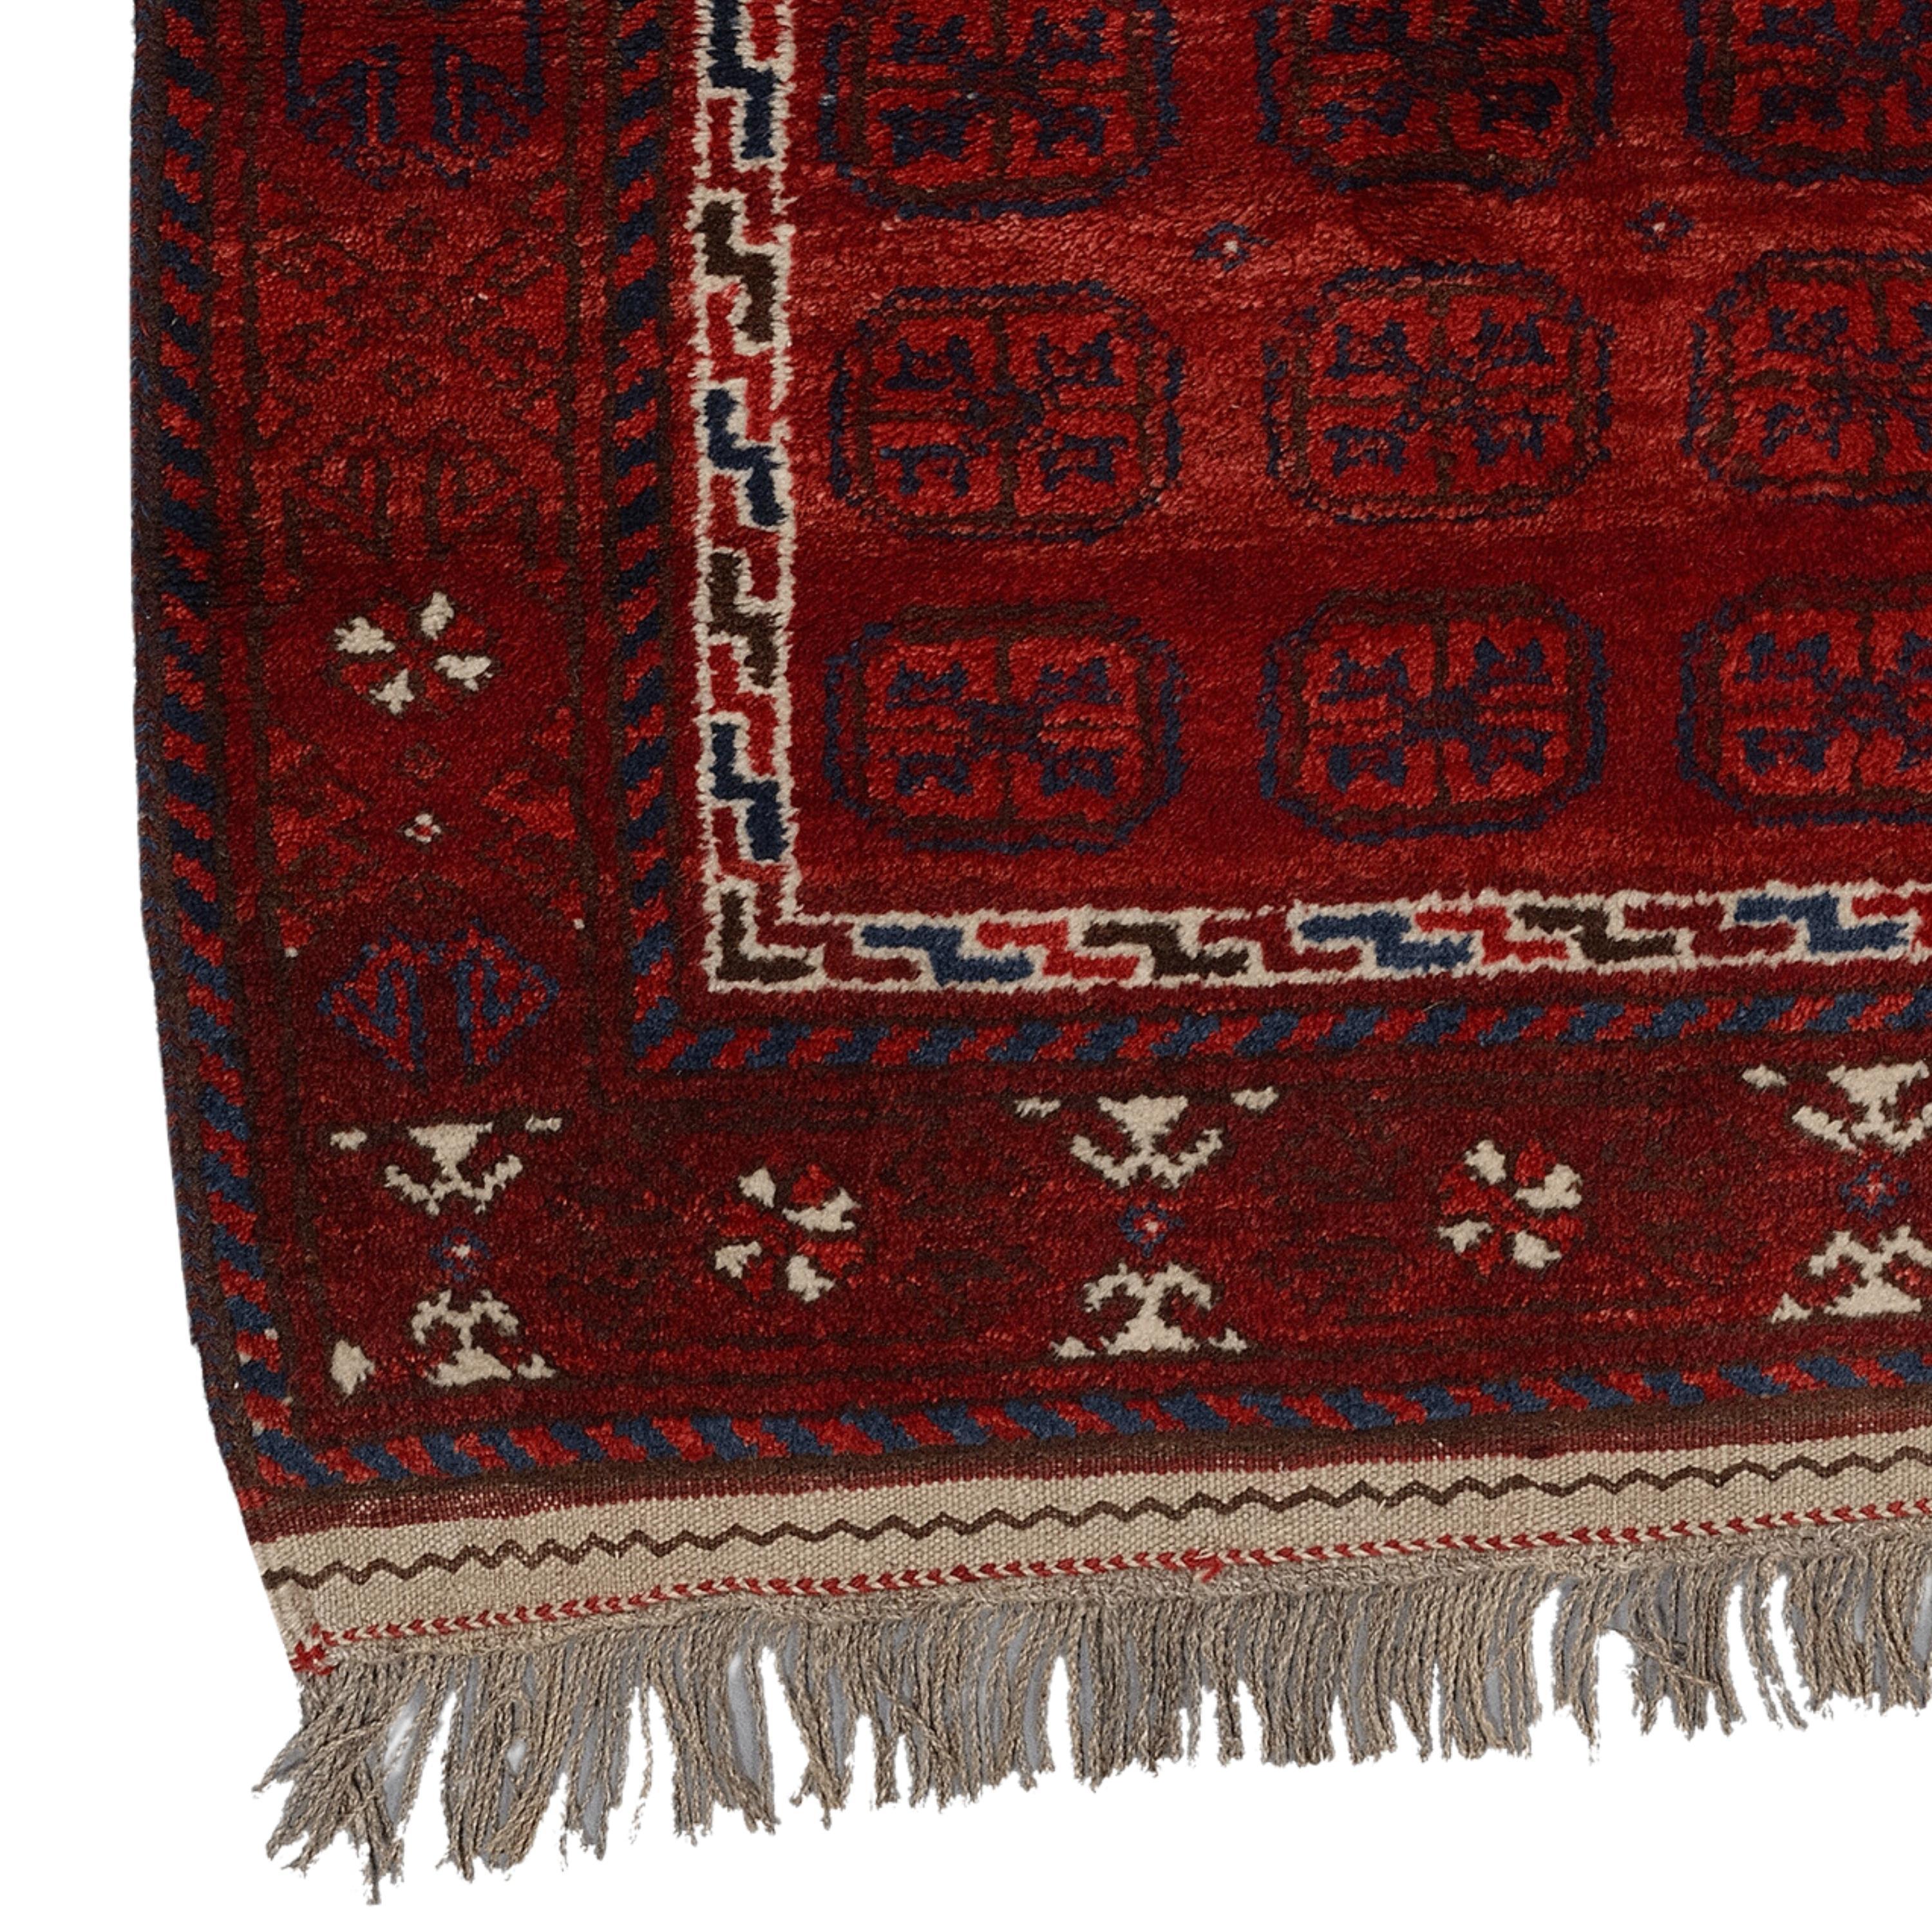 Vintage Baluch Prayer Rug
20th Century Baluch Rug
90x112cm  2,95x3,67 Ft

The colors used in these antique rugs were dark tones of red, brown, blue, purple and ivory. All the Baluch rugs have a heavy use of black outlines and black shades making the